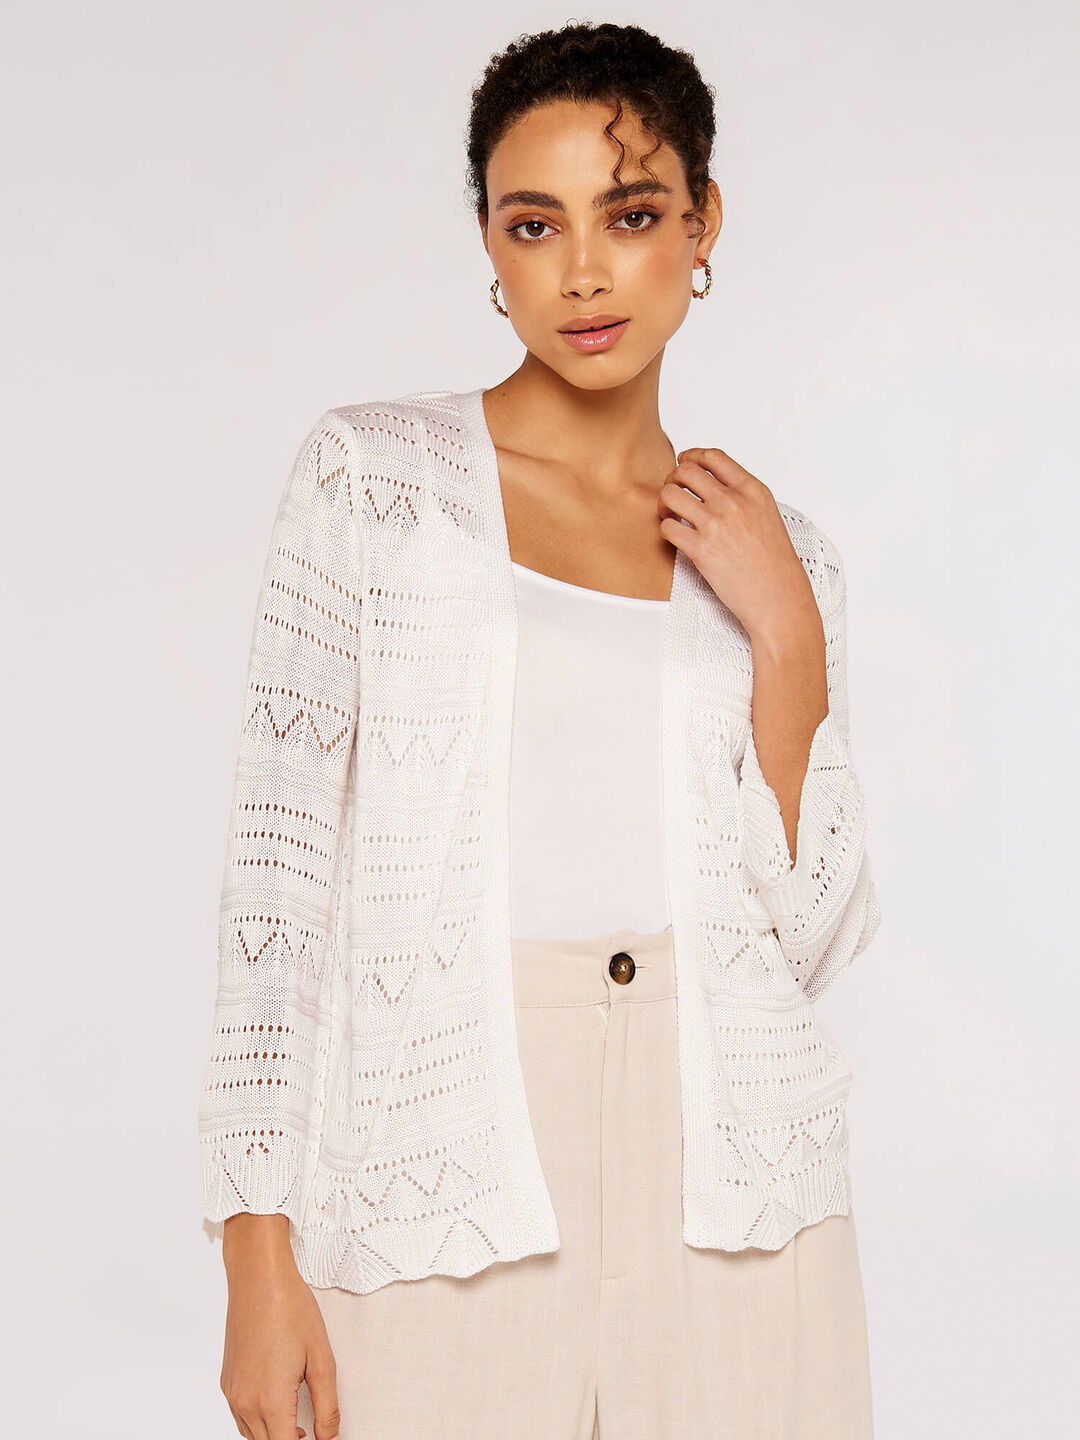 Pointelle Patterned Cardigan